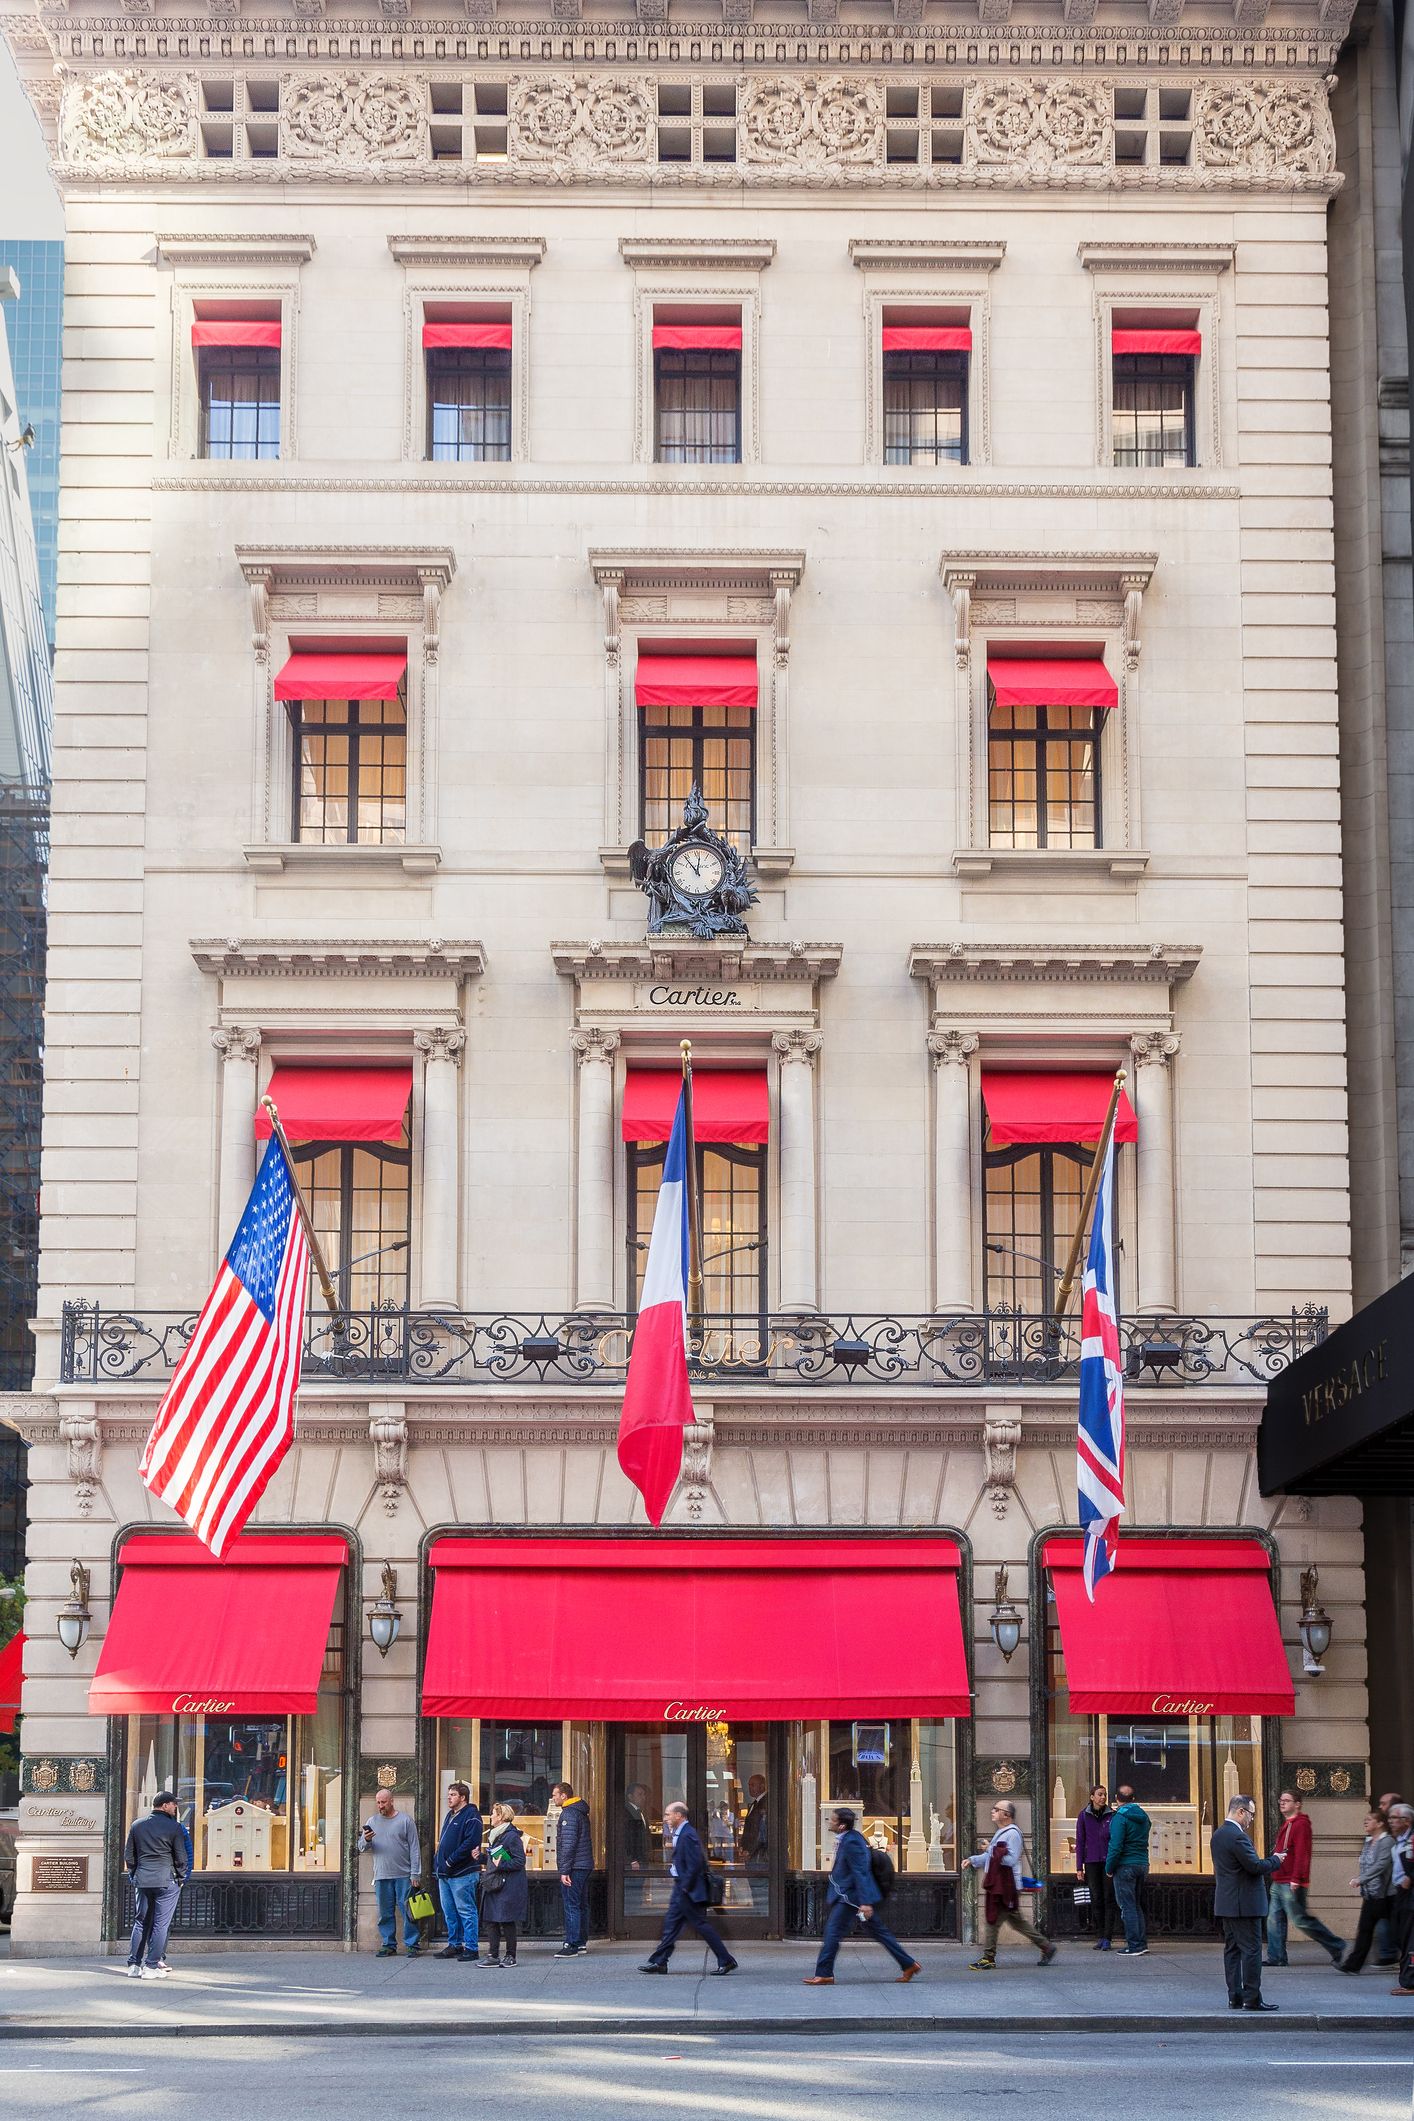 The Top 10 Secrets of Saks Fifth Avenue in Midtown, NYC - Untapped New York